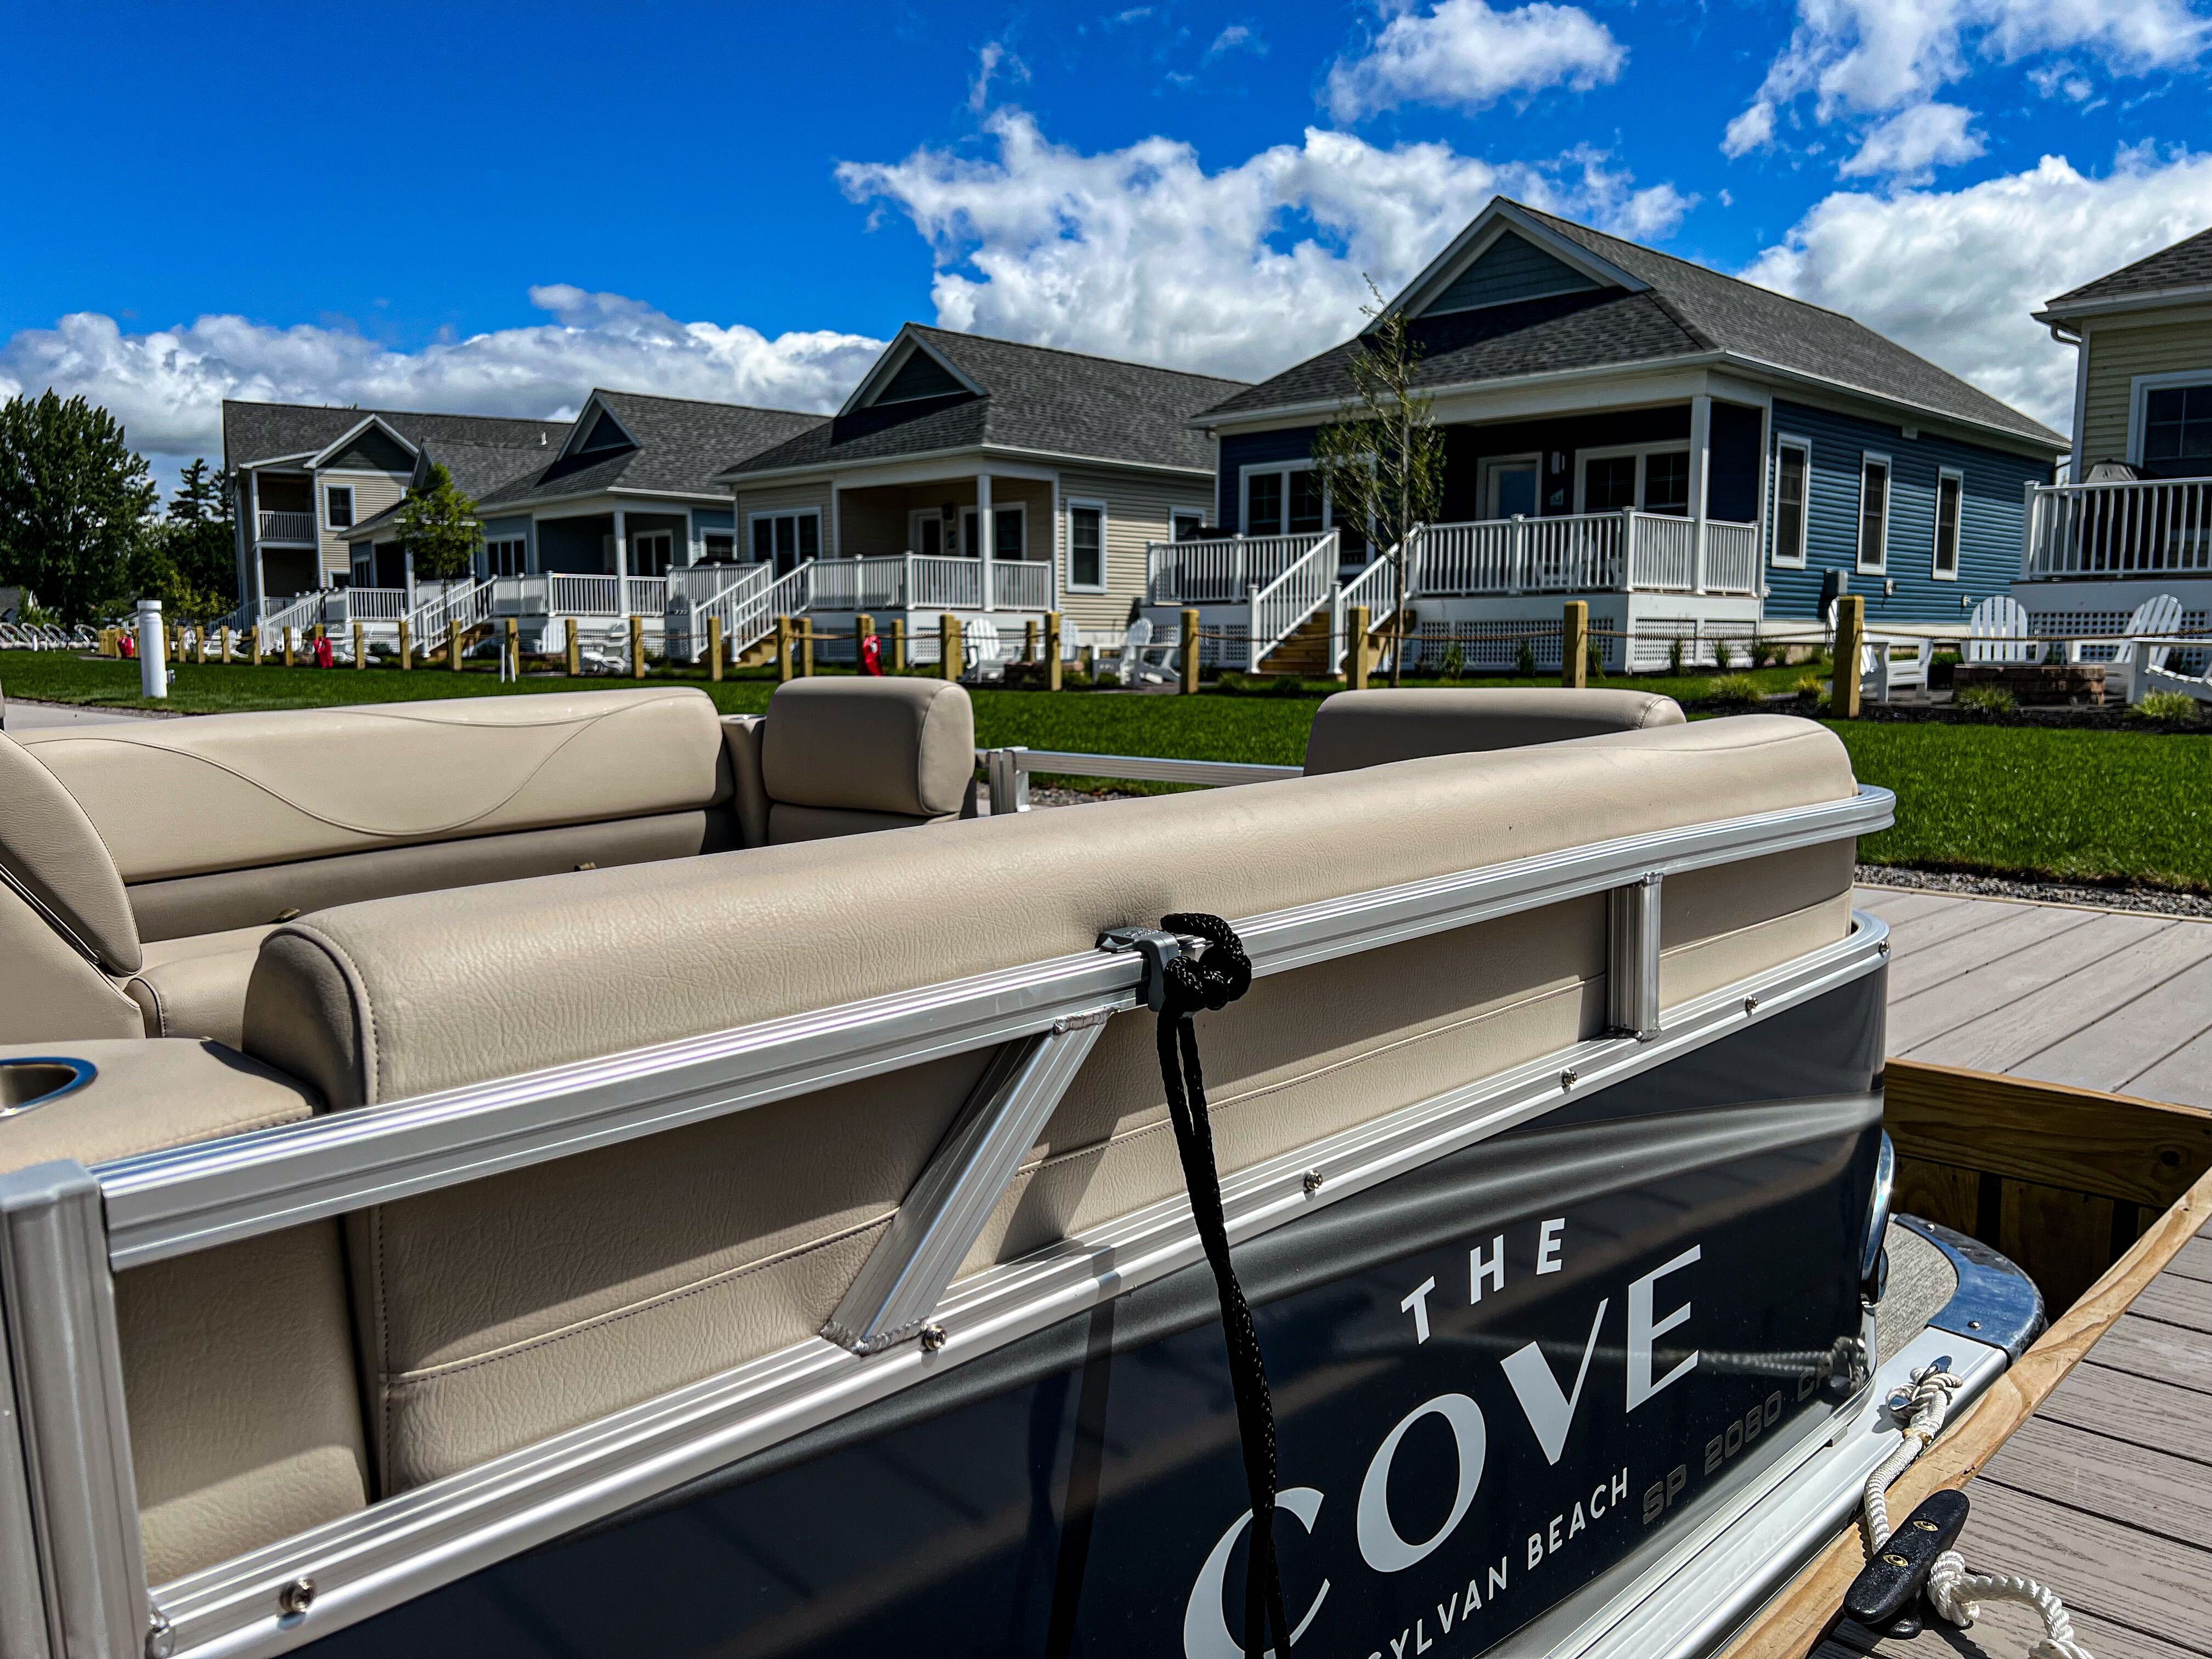 Need a waterfront vacation spot? Oneida Indian Nation opens The Cove in  Sylvan Beach 